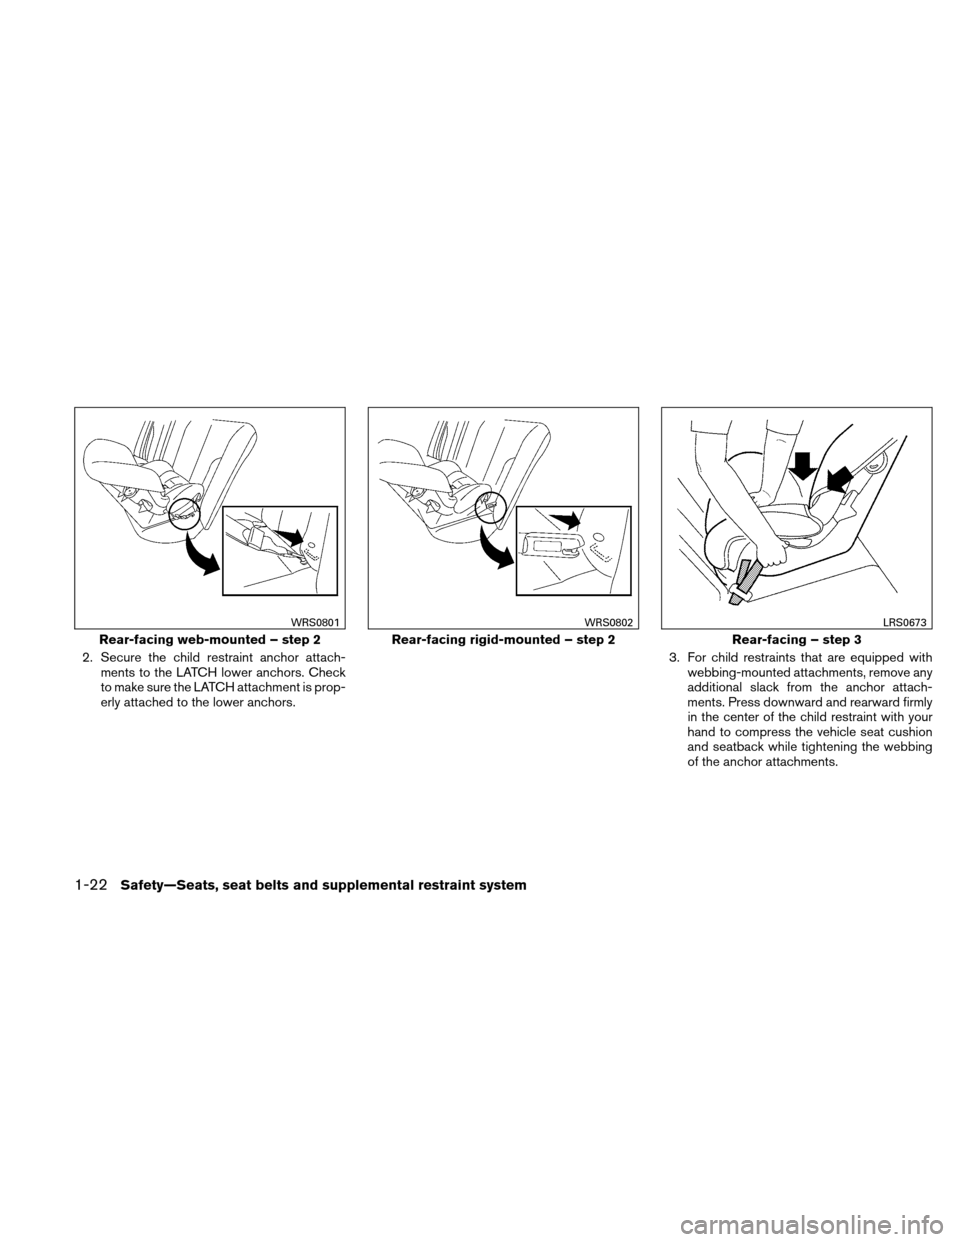 NISSAN ALTIMA HYBRID 2010 L32A / 4.G Workshop Manual 2. Secure the child restraint anchor attach-ments to the LATCH lower anchors. Check
to make sure the LATCH attachment is prop-
erly attached to the lower anchors. 3. For child restraints that are equi